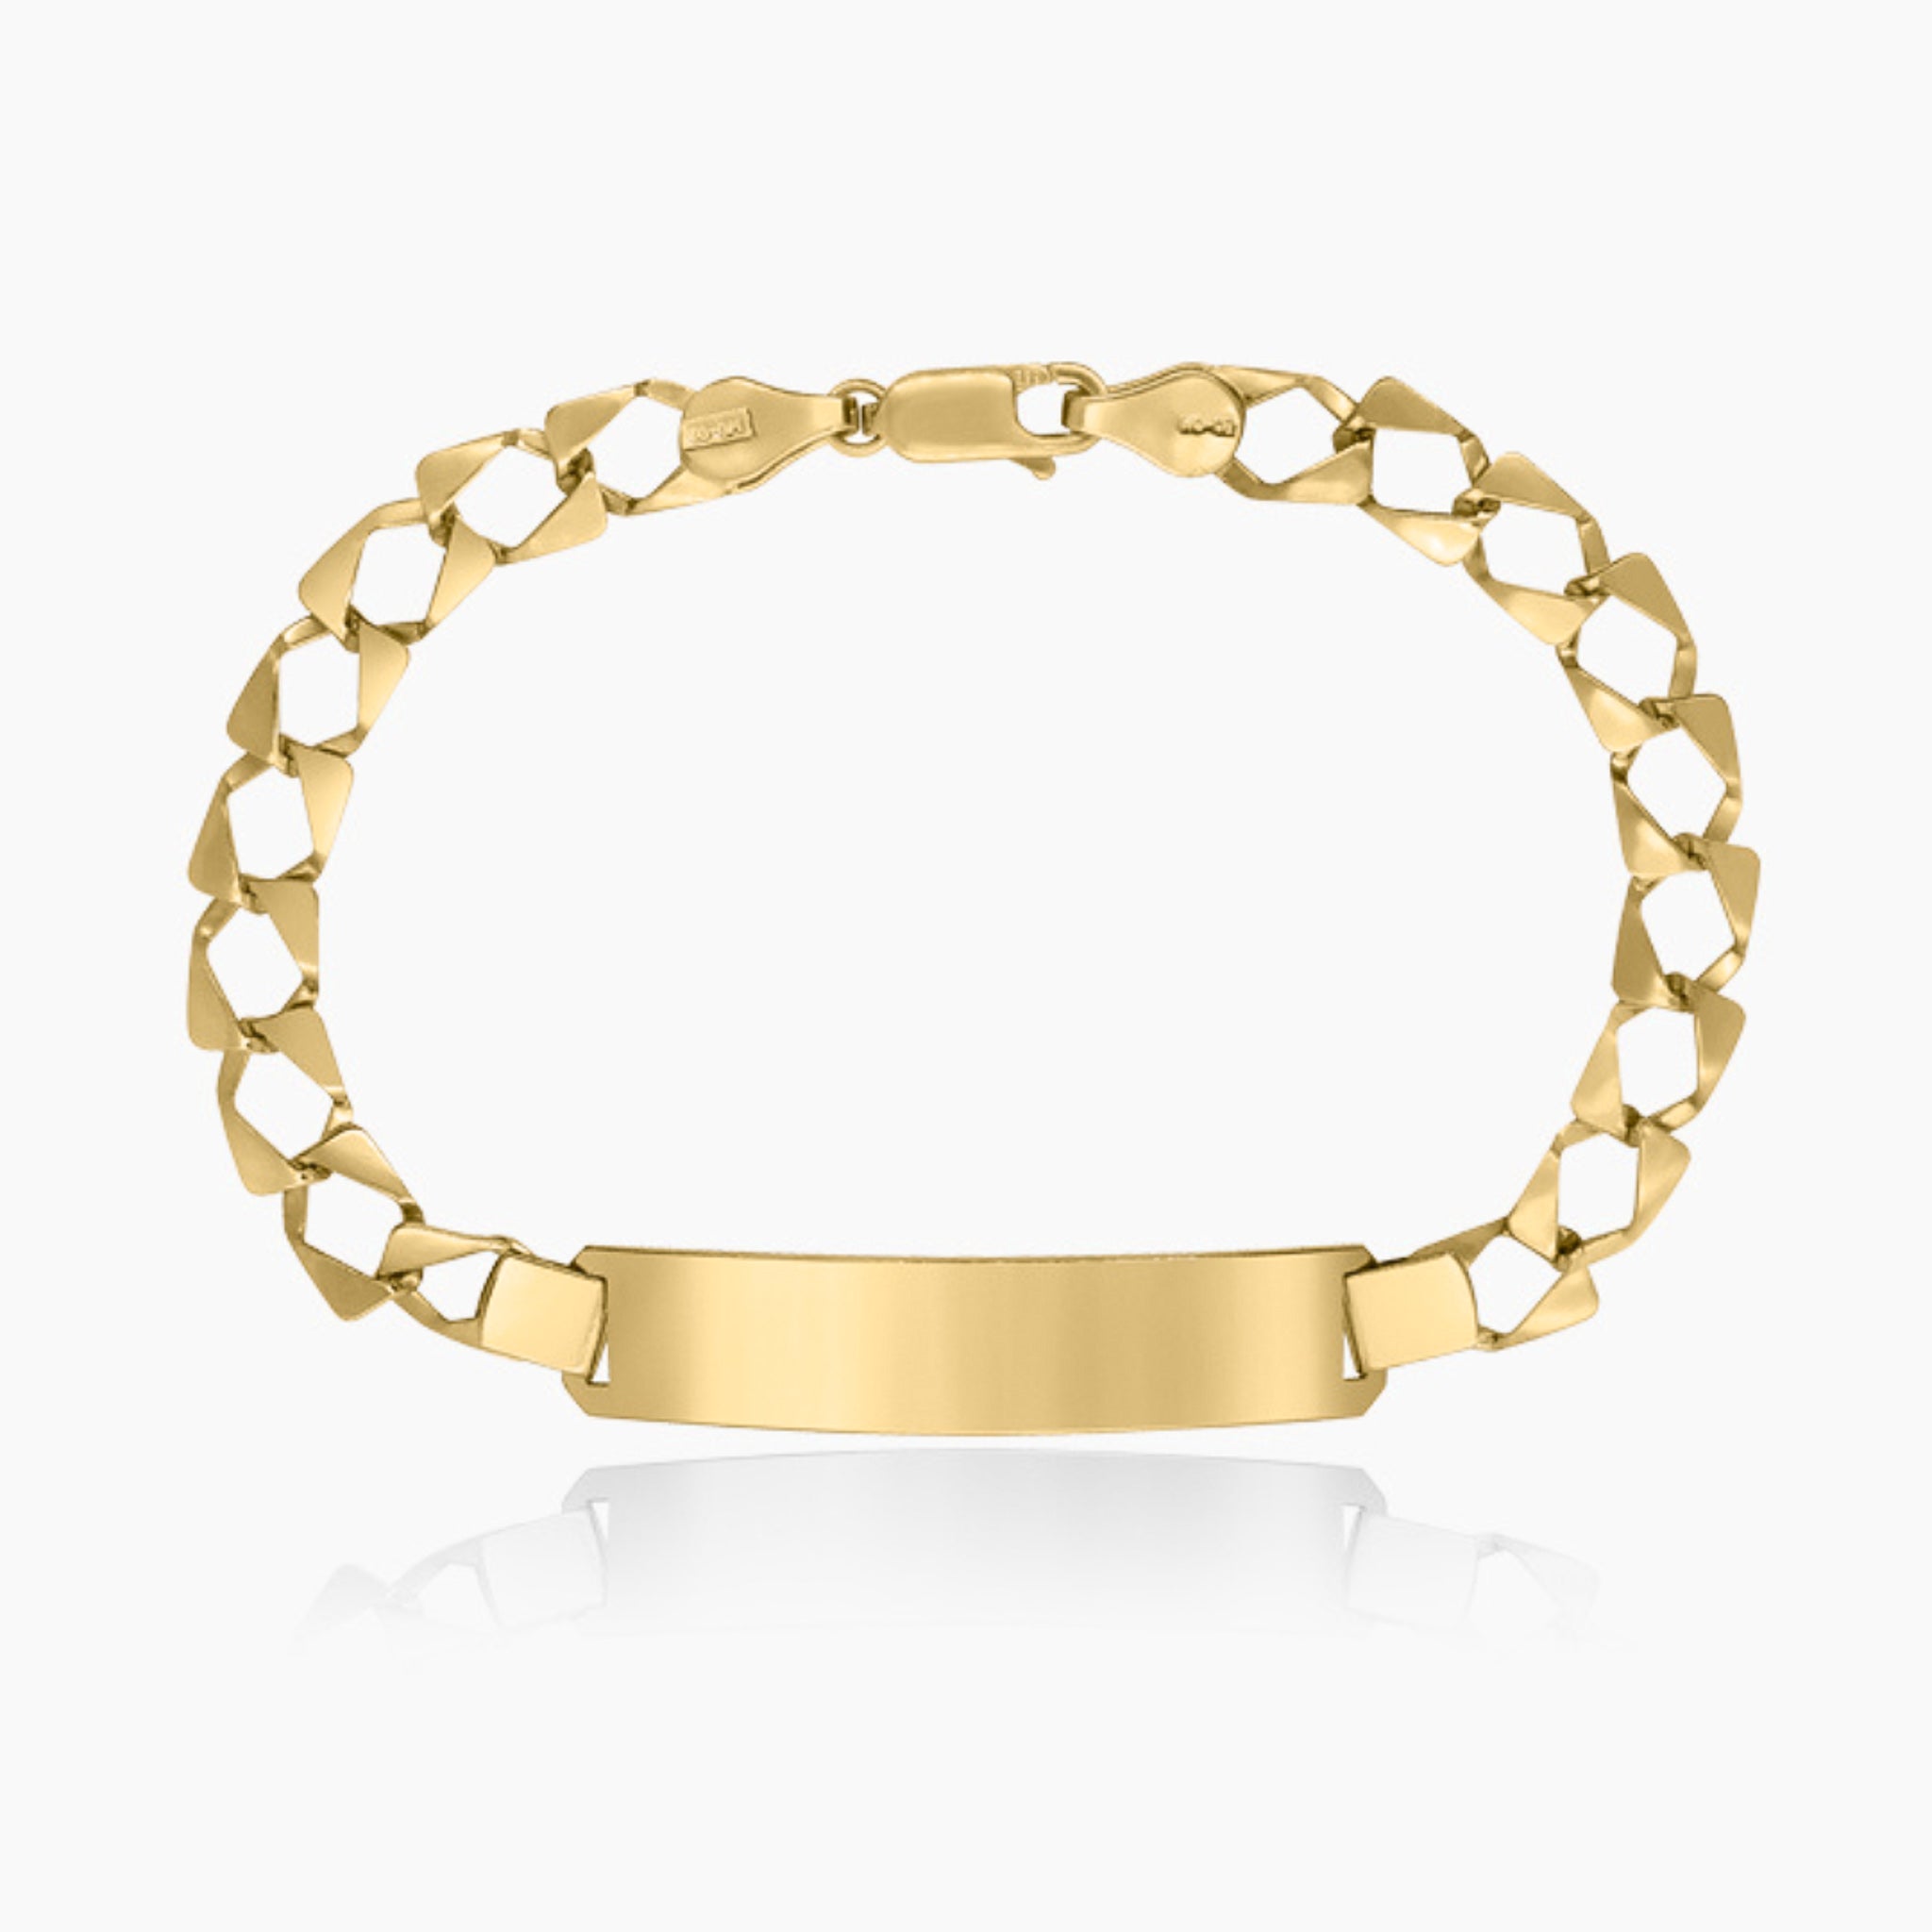 14K YELLOW GOLD SQUARE CURB LINK ID BRACELET